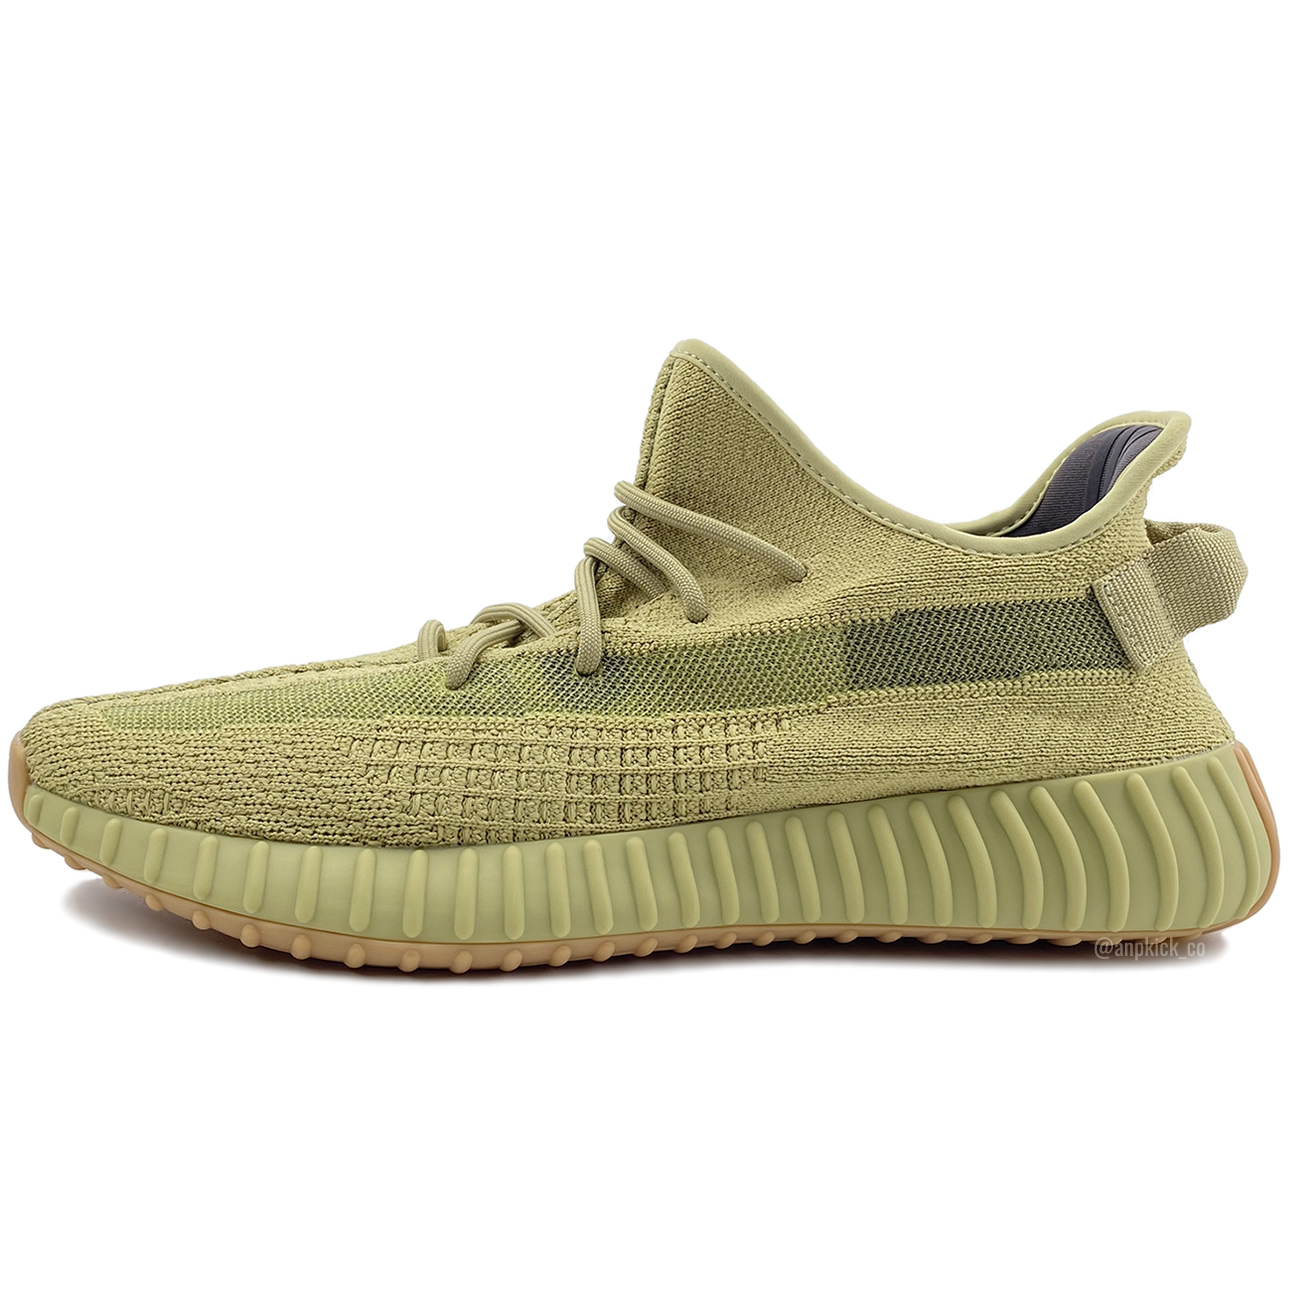 Adidas Yeezy Boost 350 V2 Sulfur Fy5346 First Preview Release Date (1) - www.newkick.org